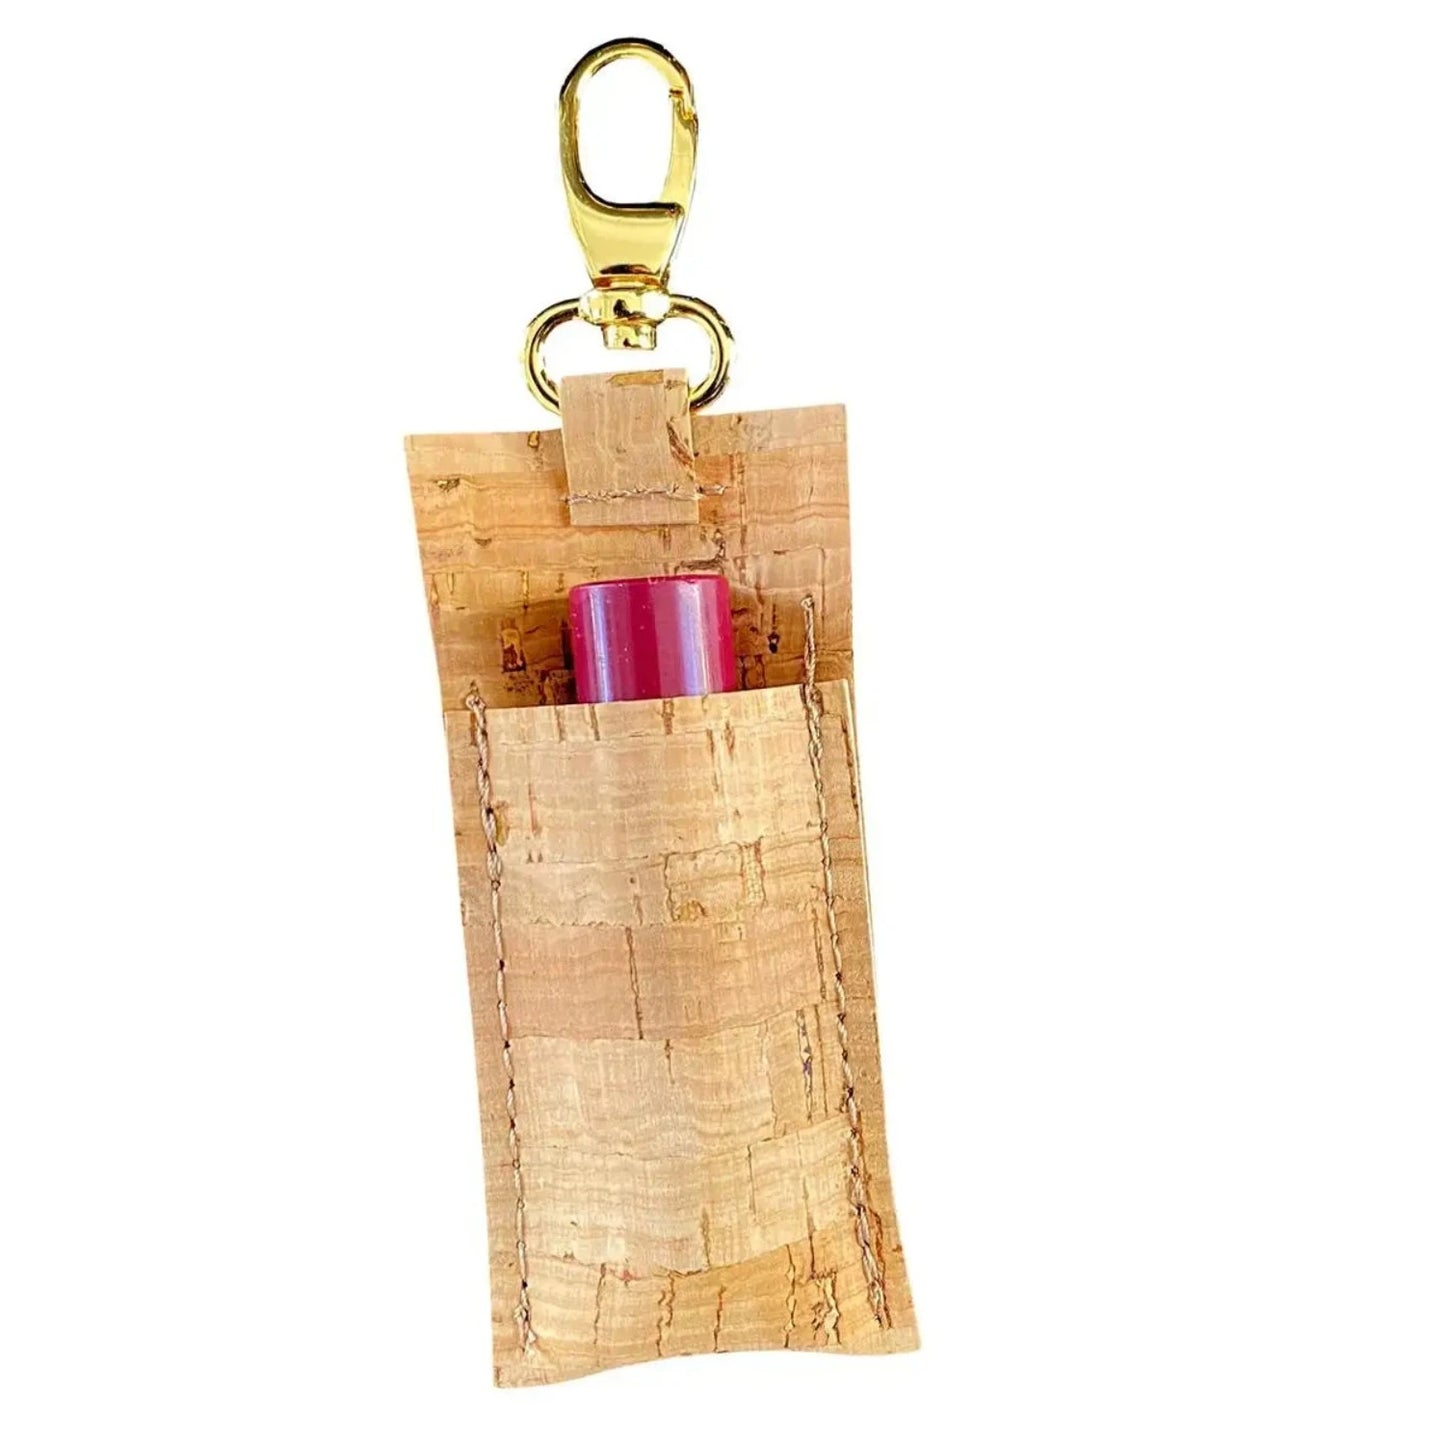 Lip Balm Holder Key Chain in Tan Cork with Gold Color Key Clip